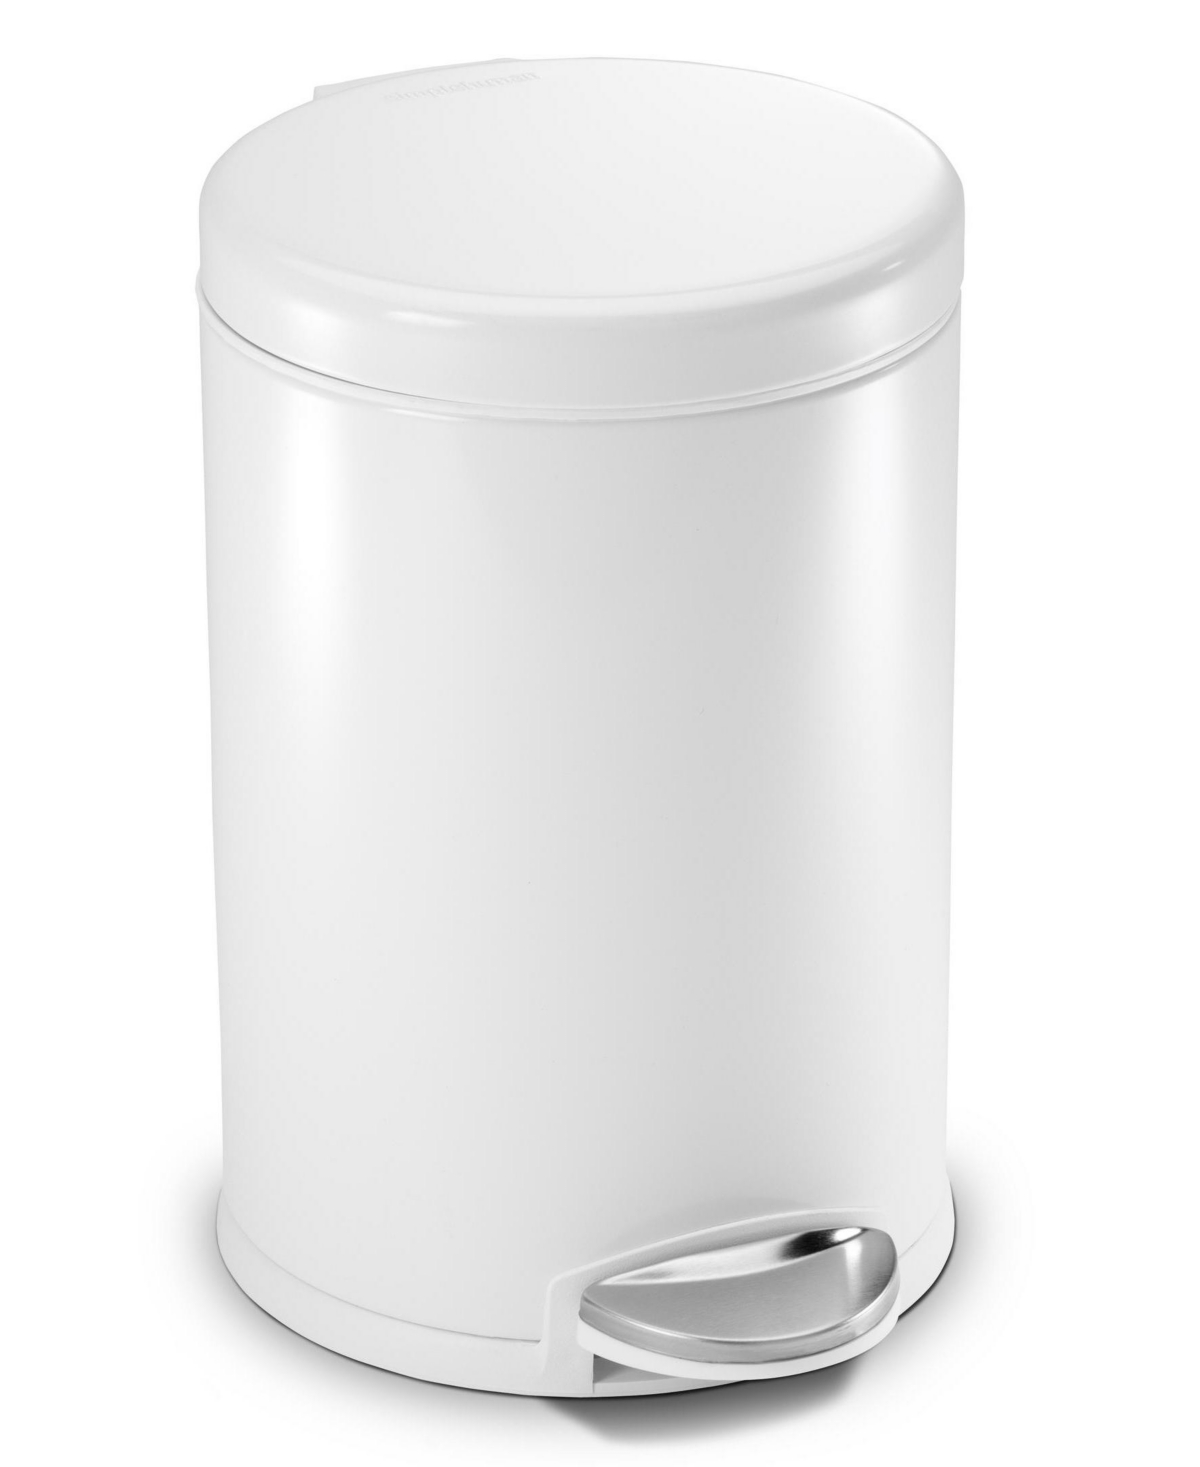 4.5 Litre Steel Round Step Can - White Stainless Steel